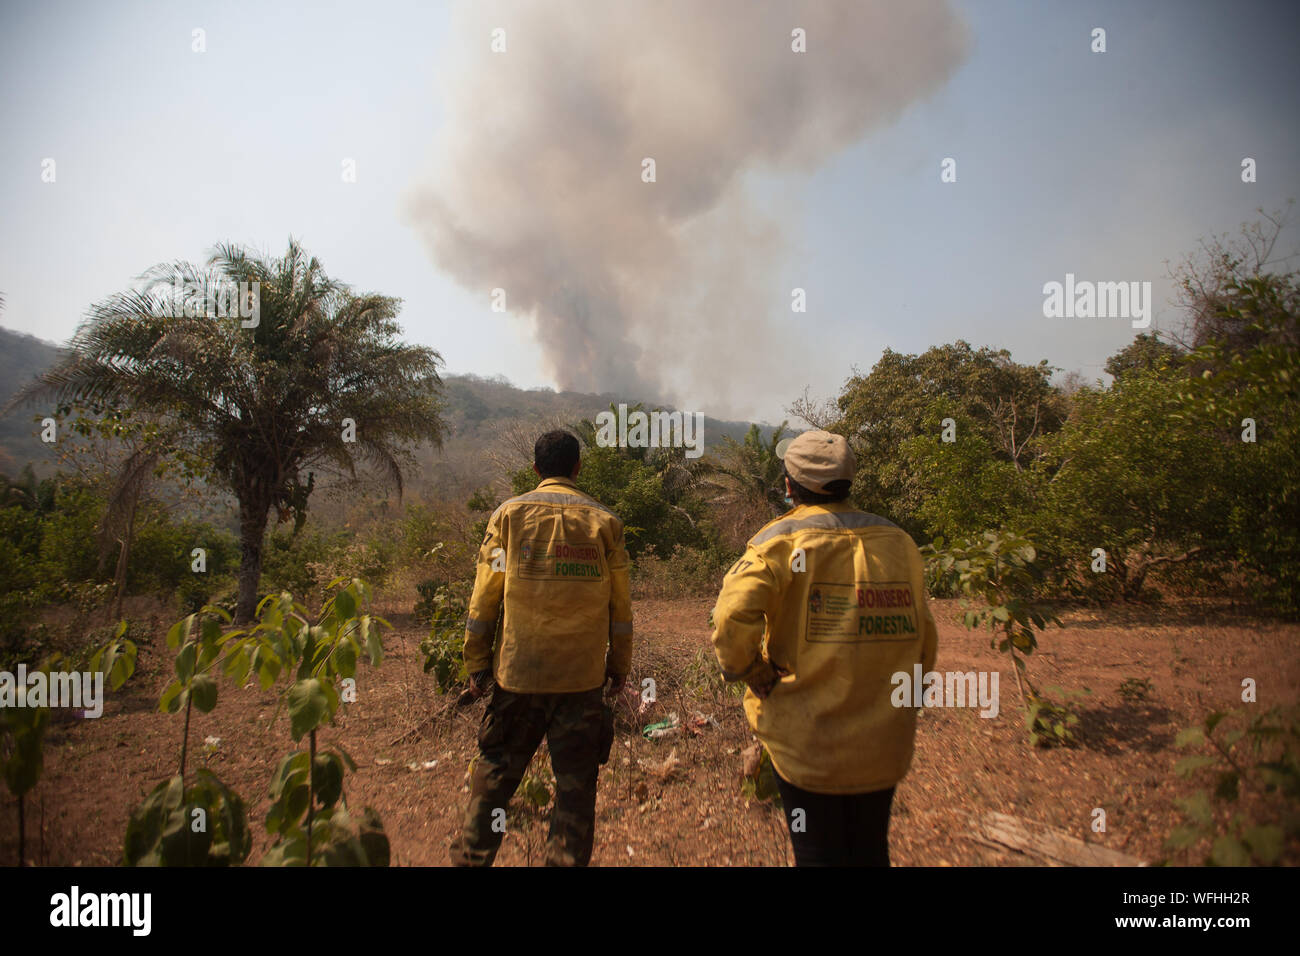 SUCRE, OP - 24.08.2019: LAND BURNED BY FIRES IN BOLIVIA - Volunteer bomber miraculous humareda caused by the fire in Robore. (Photo: Gaston Brito/Fotoarena) Credit: Foto Arena LTDA/Alamy Live News Credit: Foto Arena LTDA/Alamy Live News Credit: Foto Arena LTDA/Alamy Live News Stock Photo